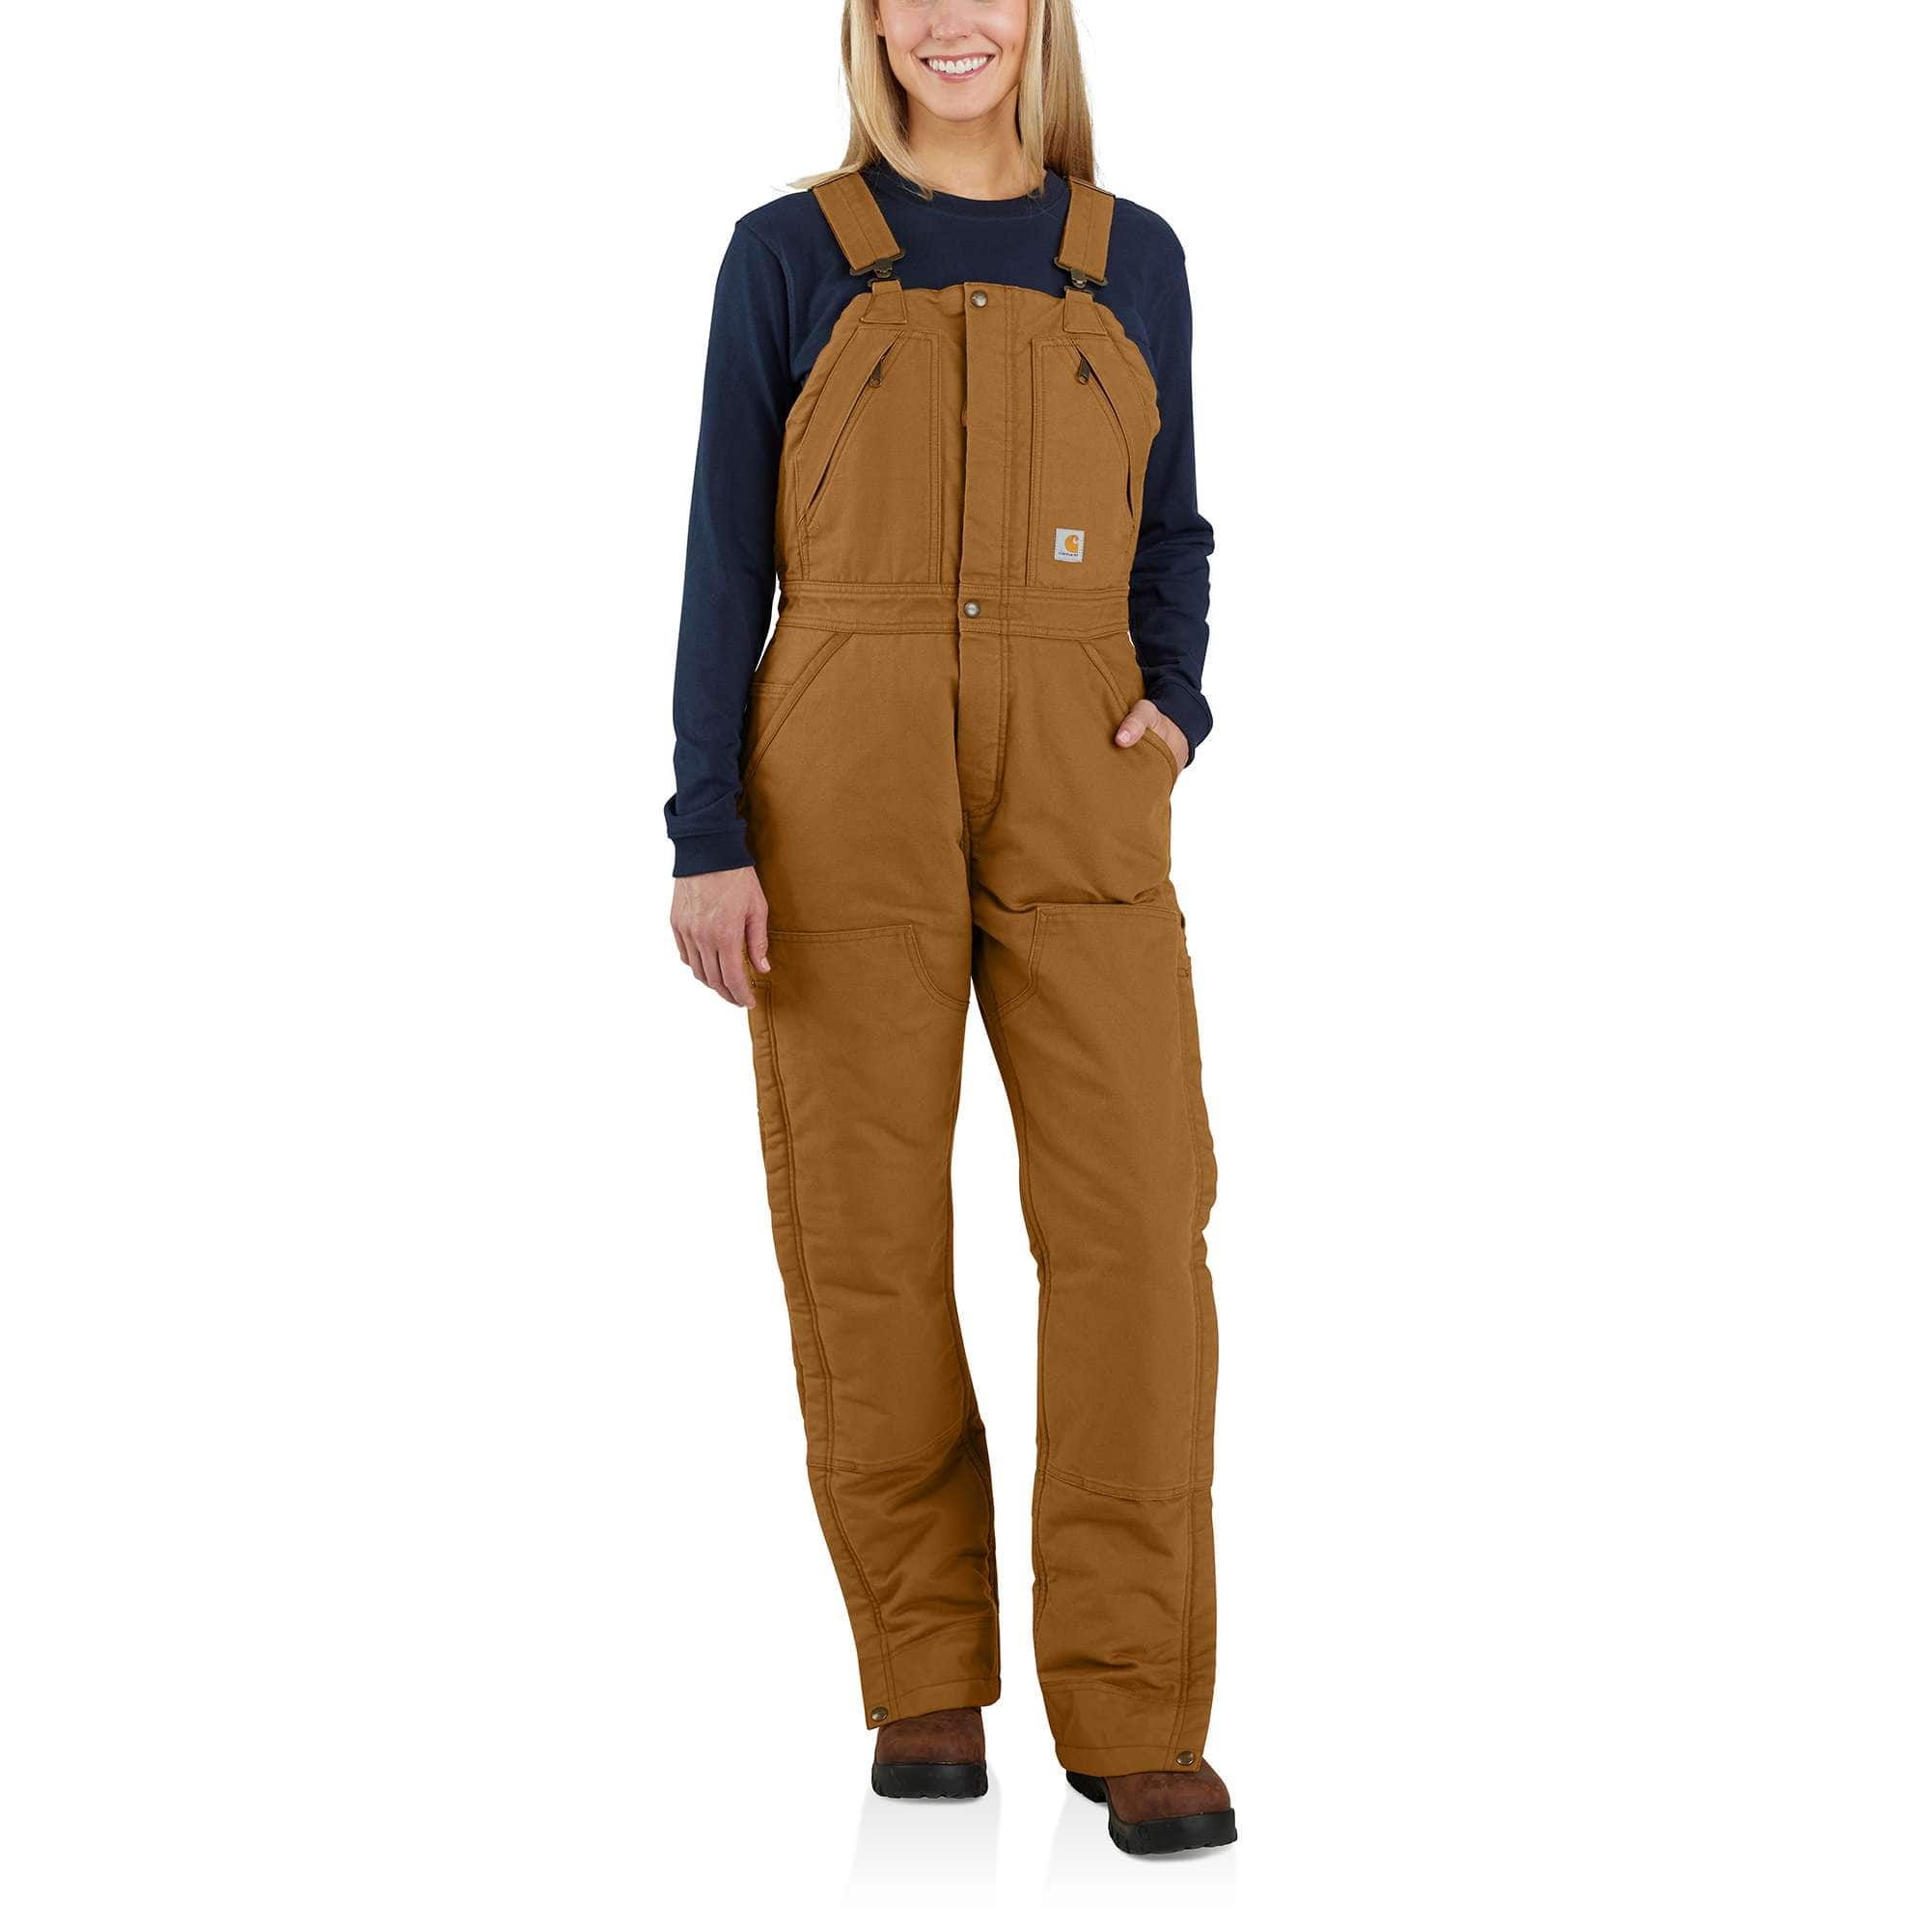 Women's Insulated Bib Overalls - Loose Fit - Washed Duck - Carhartt